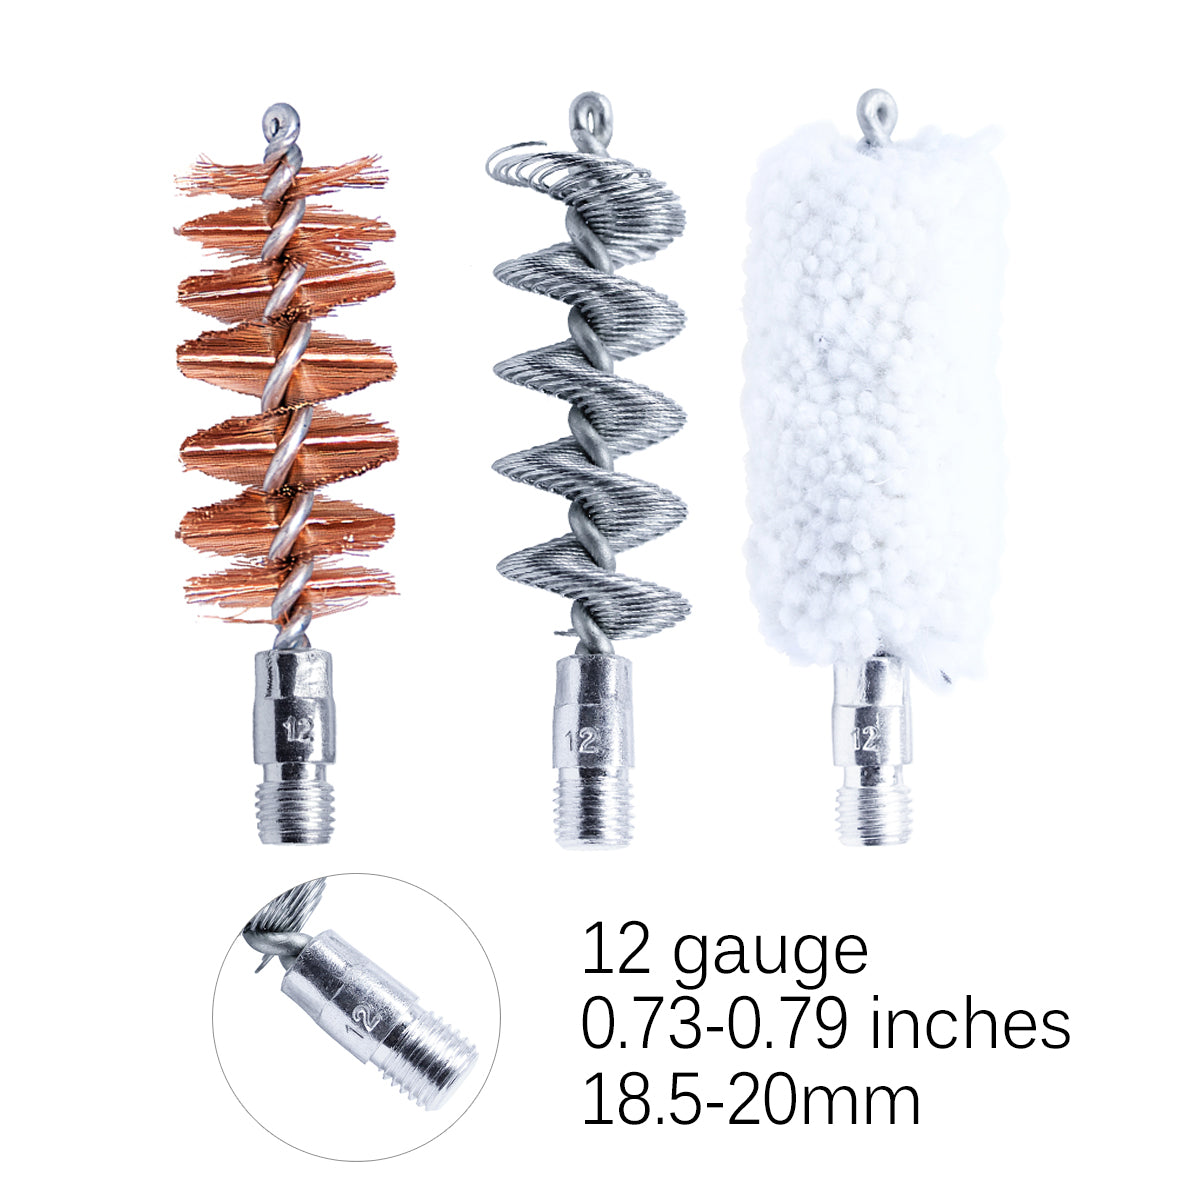 MaximalPower 7-Pack Combo of Gun Cleaning Bore Brushes